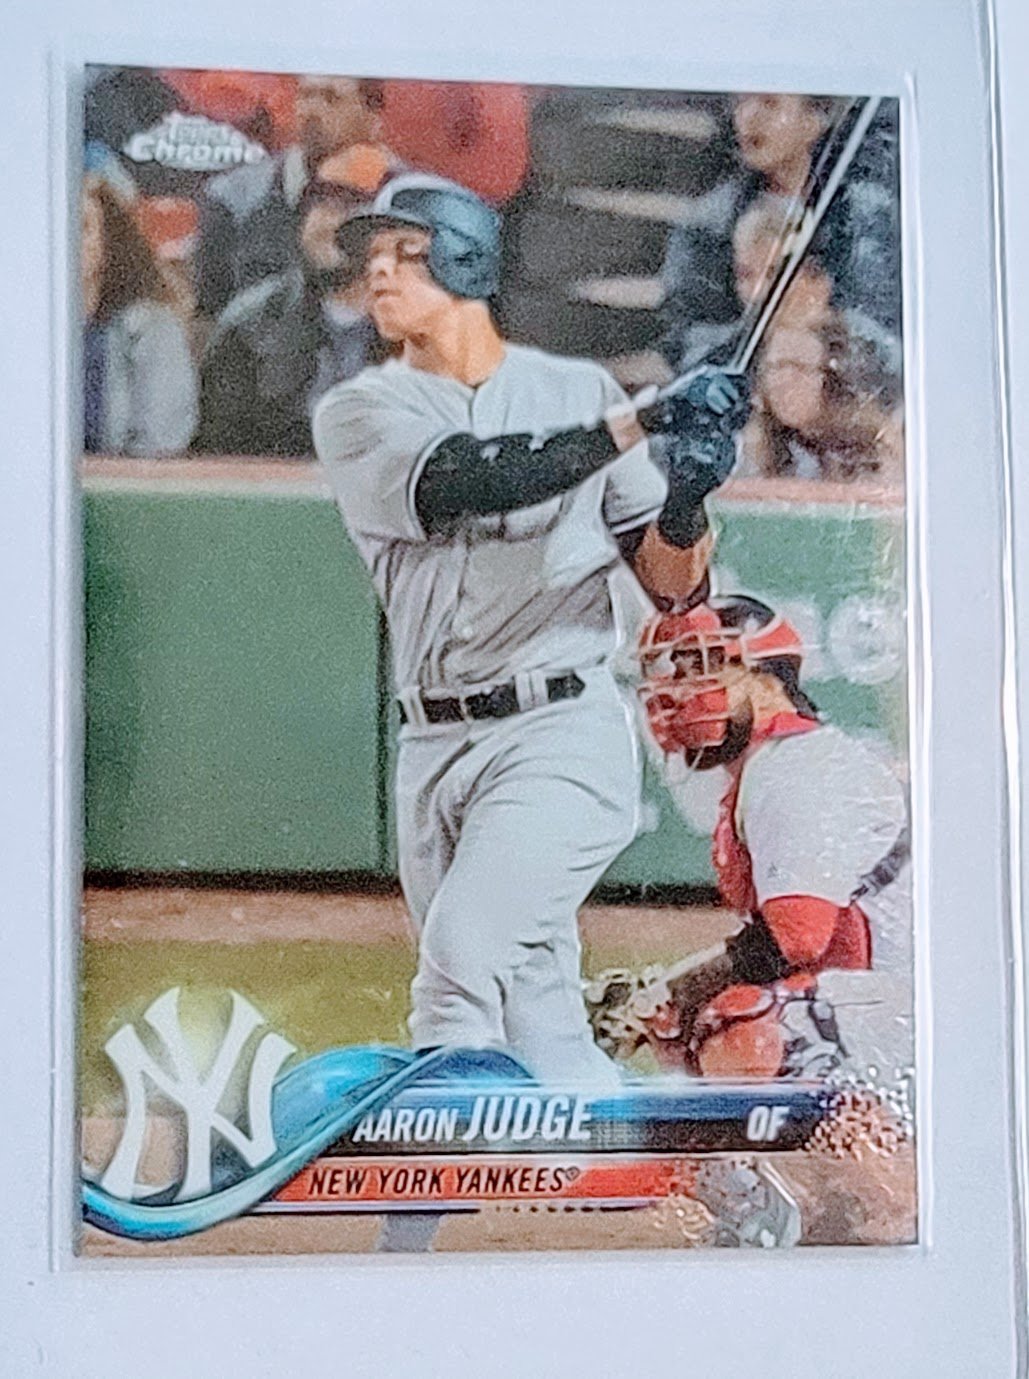 2018 Topps Chrome Aaron Judge Baseball Card TPTV simple Xclusive Collectibles   